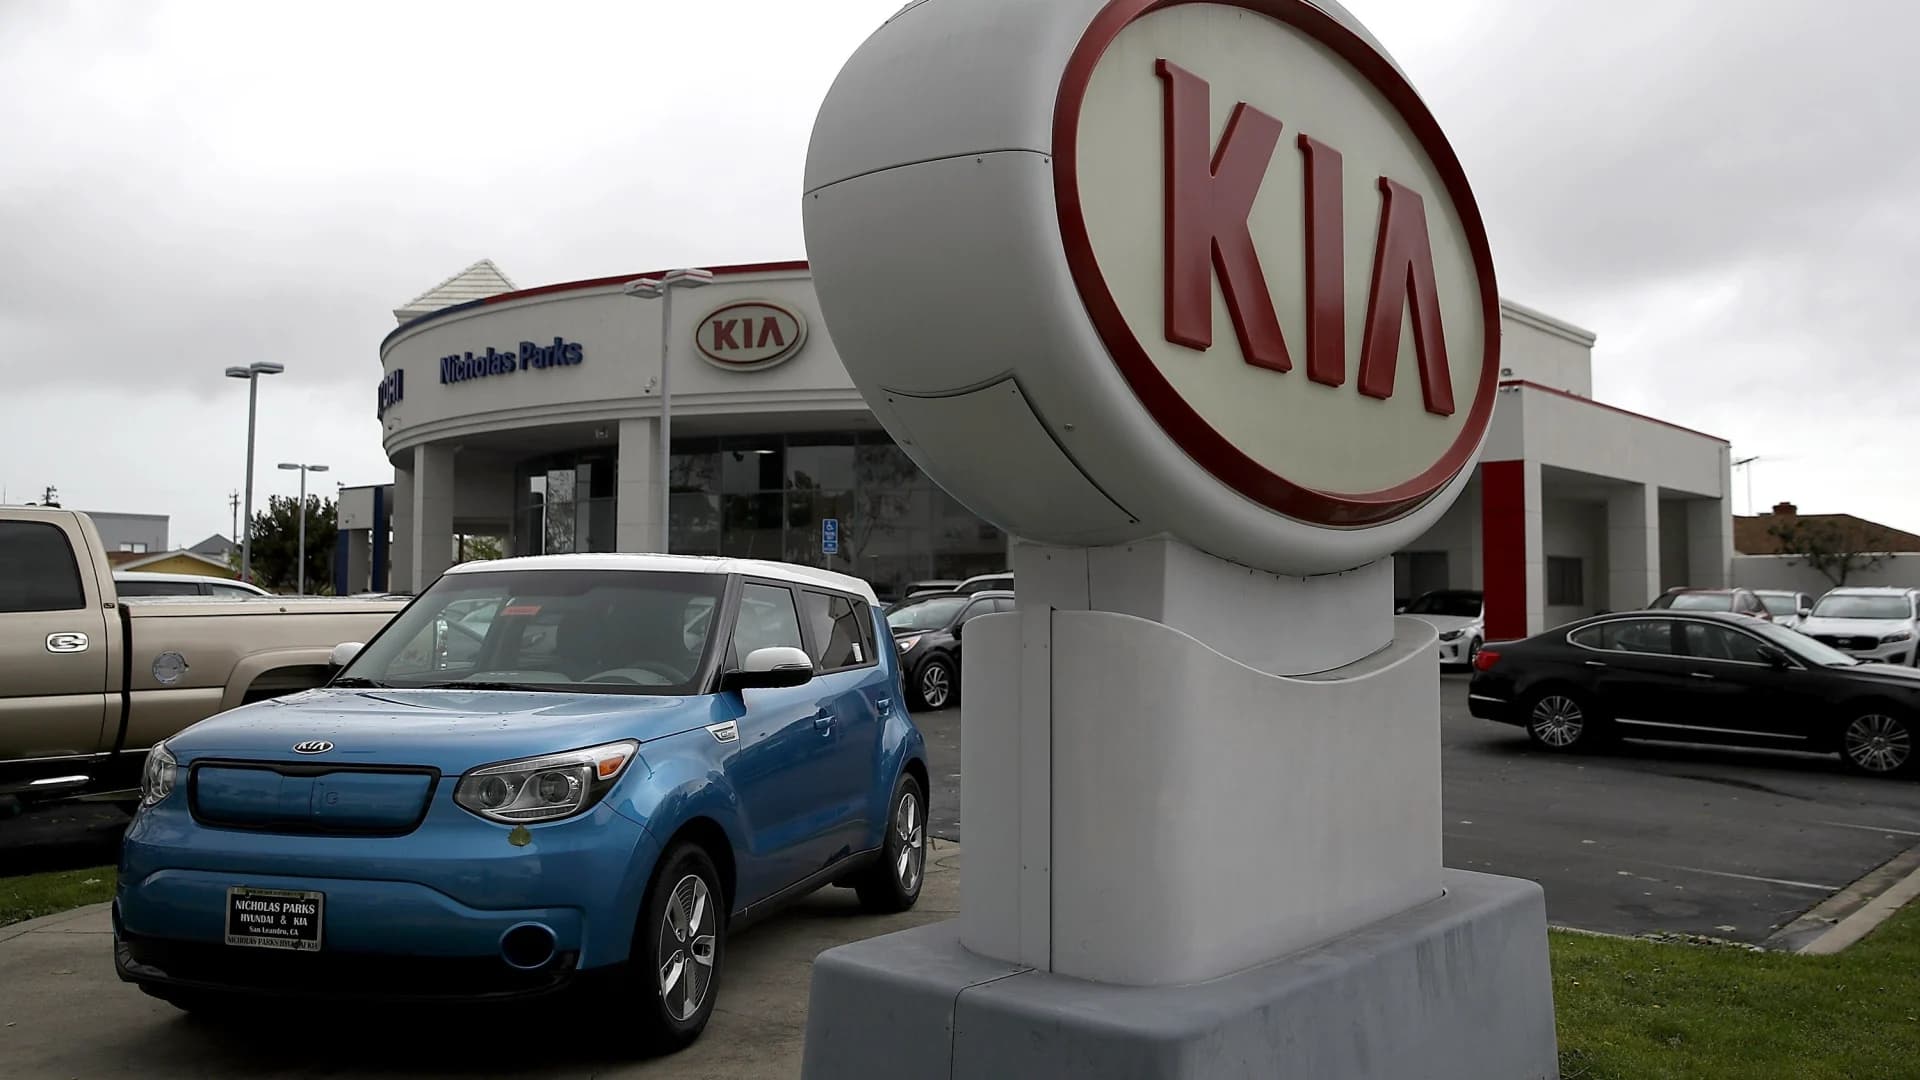 Kia recalls over 500K vehicles; air bags may not inflate